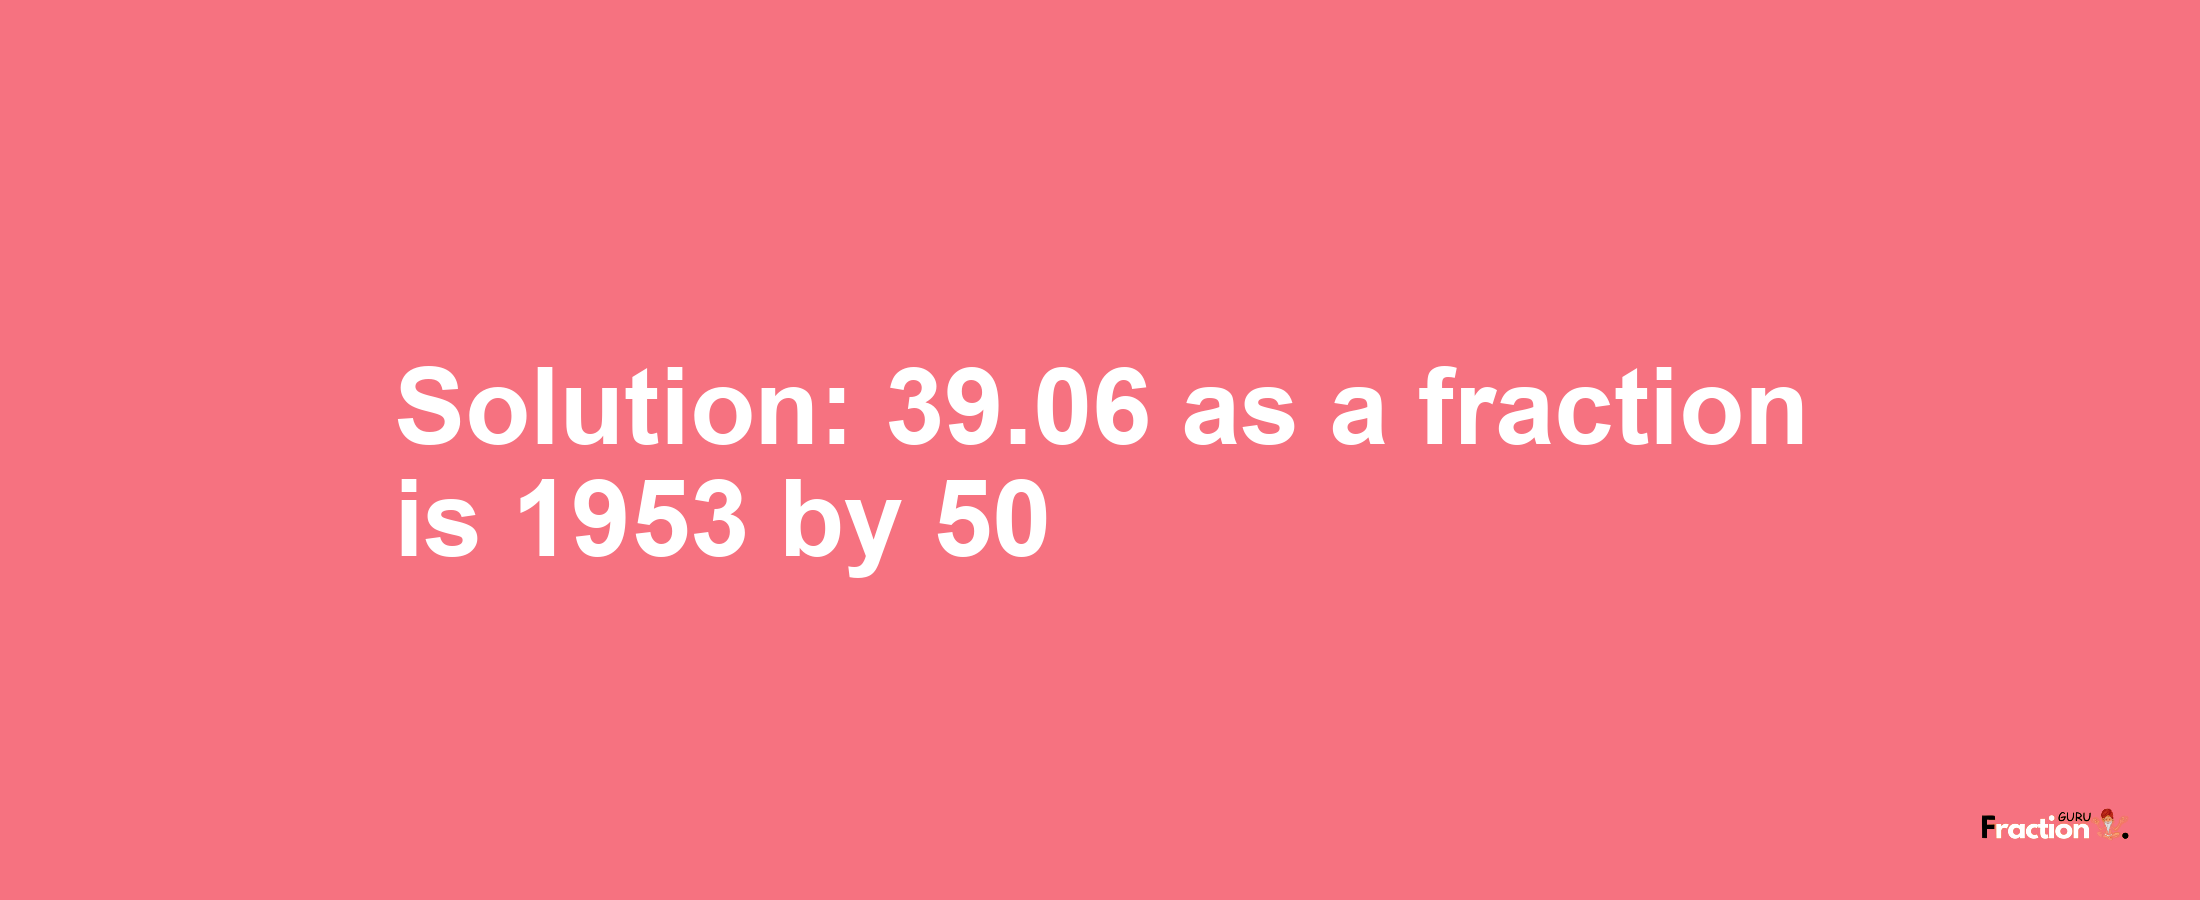 Solution:39.06 as a fraction is 1953/50